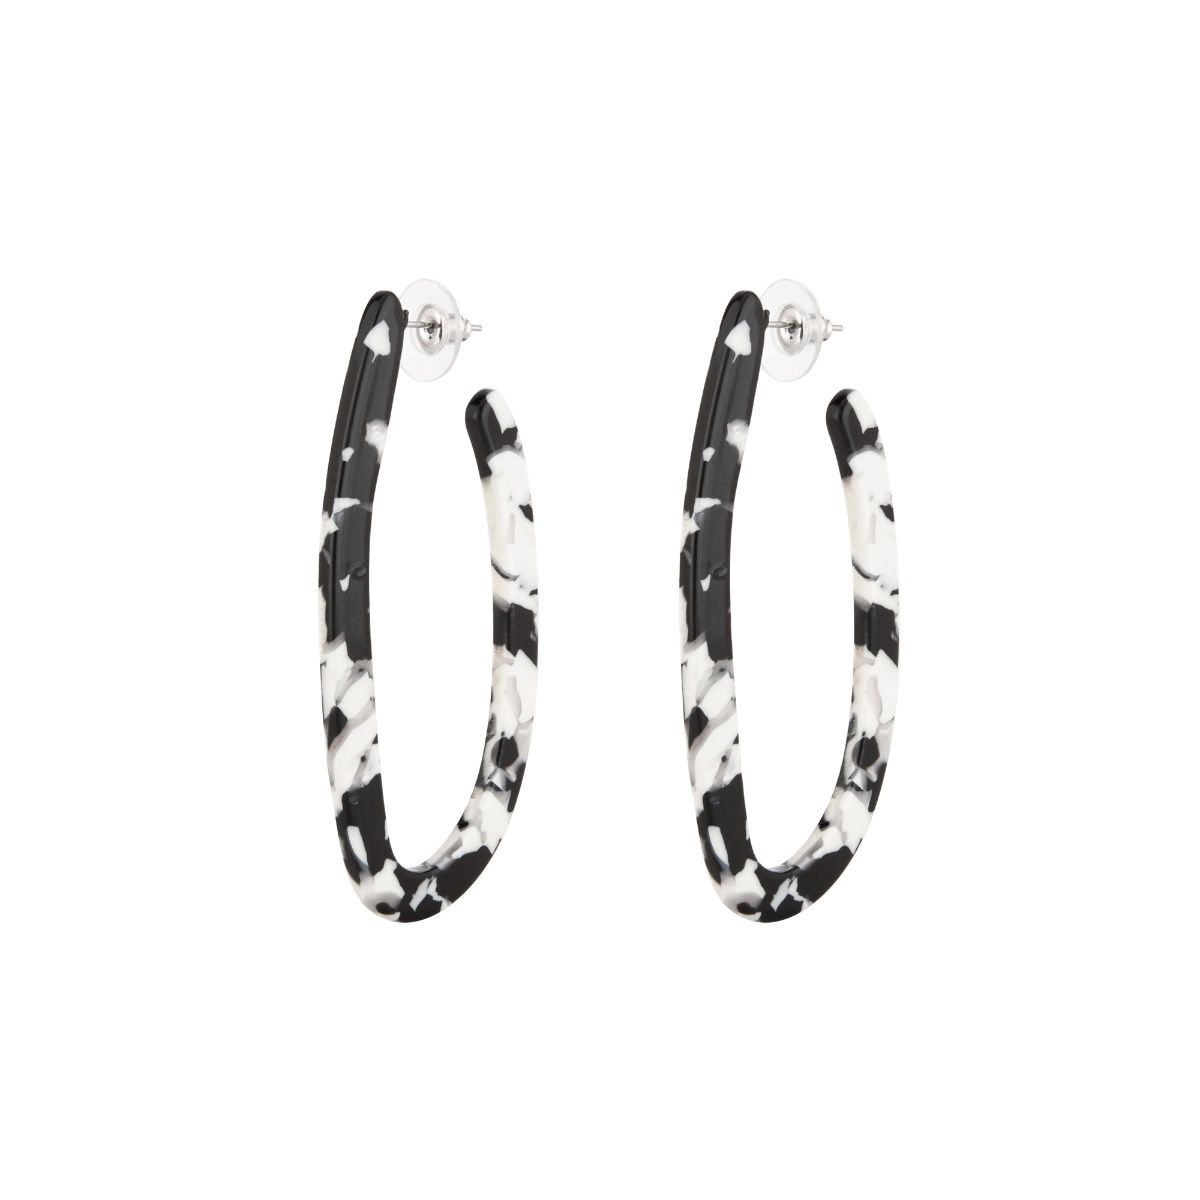 OOMPH Earrings  Buy OOMPH Pair Of Black Stainless Steel Small Fashion Hoop  Earrings For Men  Boys Online  Nykaa Fashion